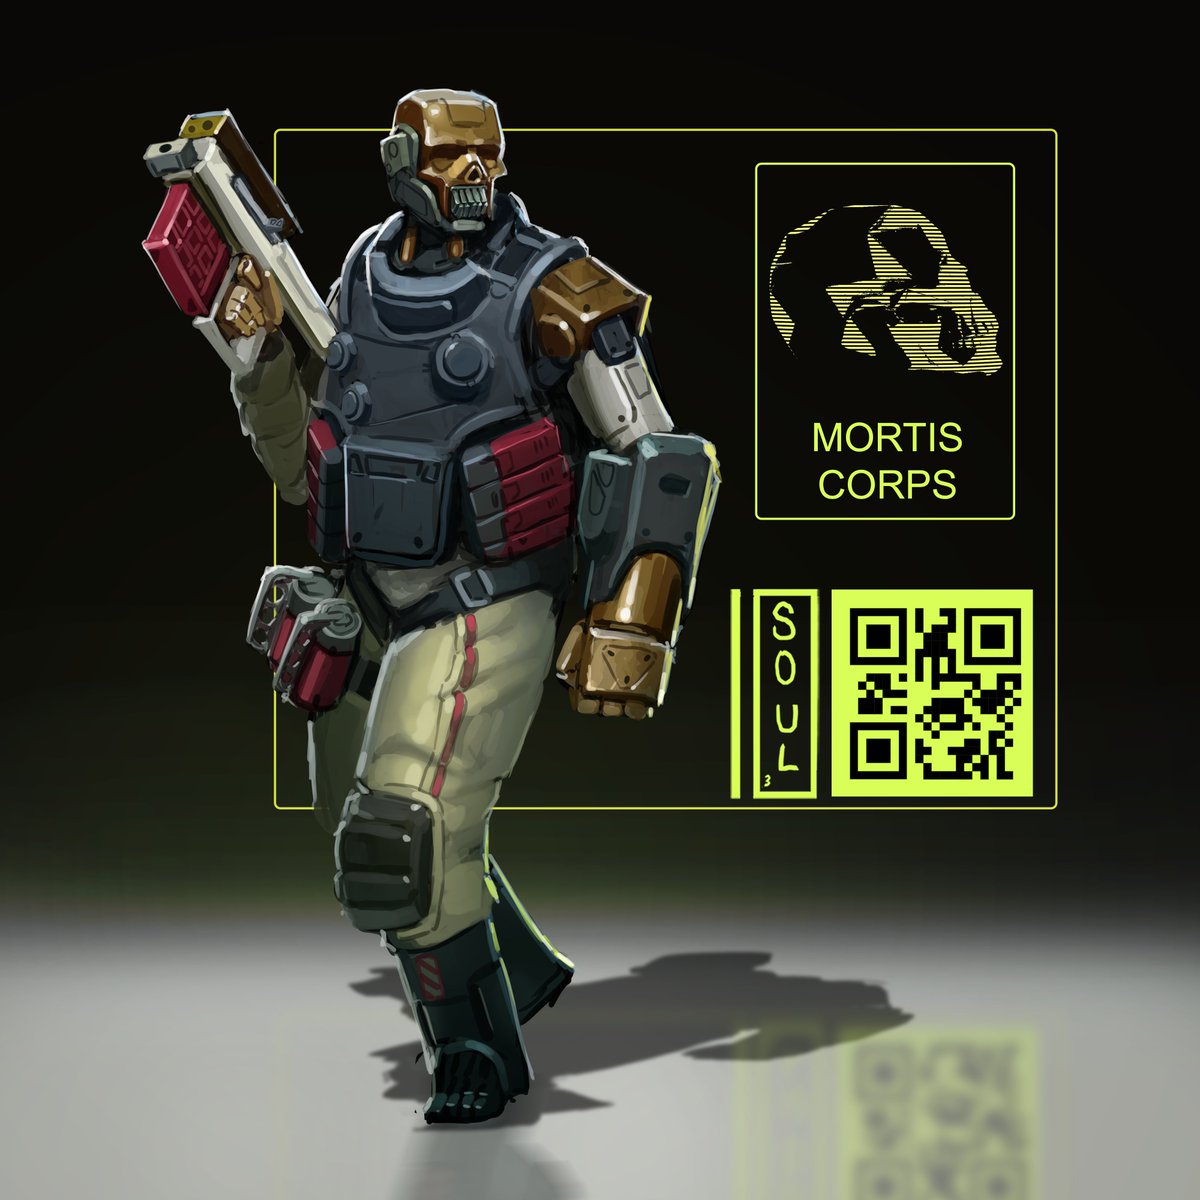 The Mortis Mega Corp doesn't mess about when it comes to protecting valuable assets and employees. Even the most lowly grunt in the Corpo guard unit was a hardened veteran in their prior life.